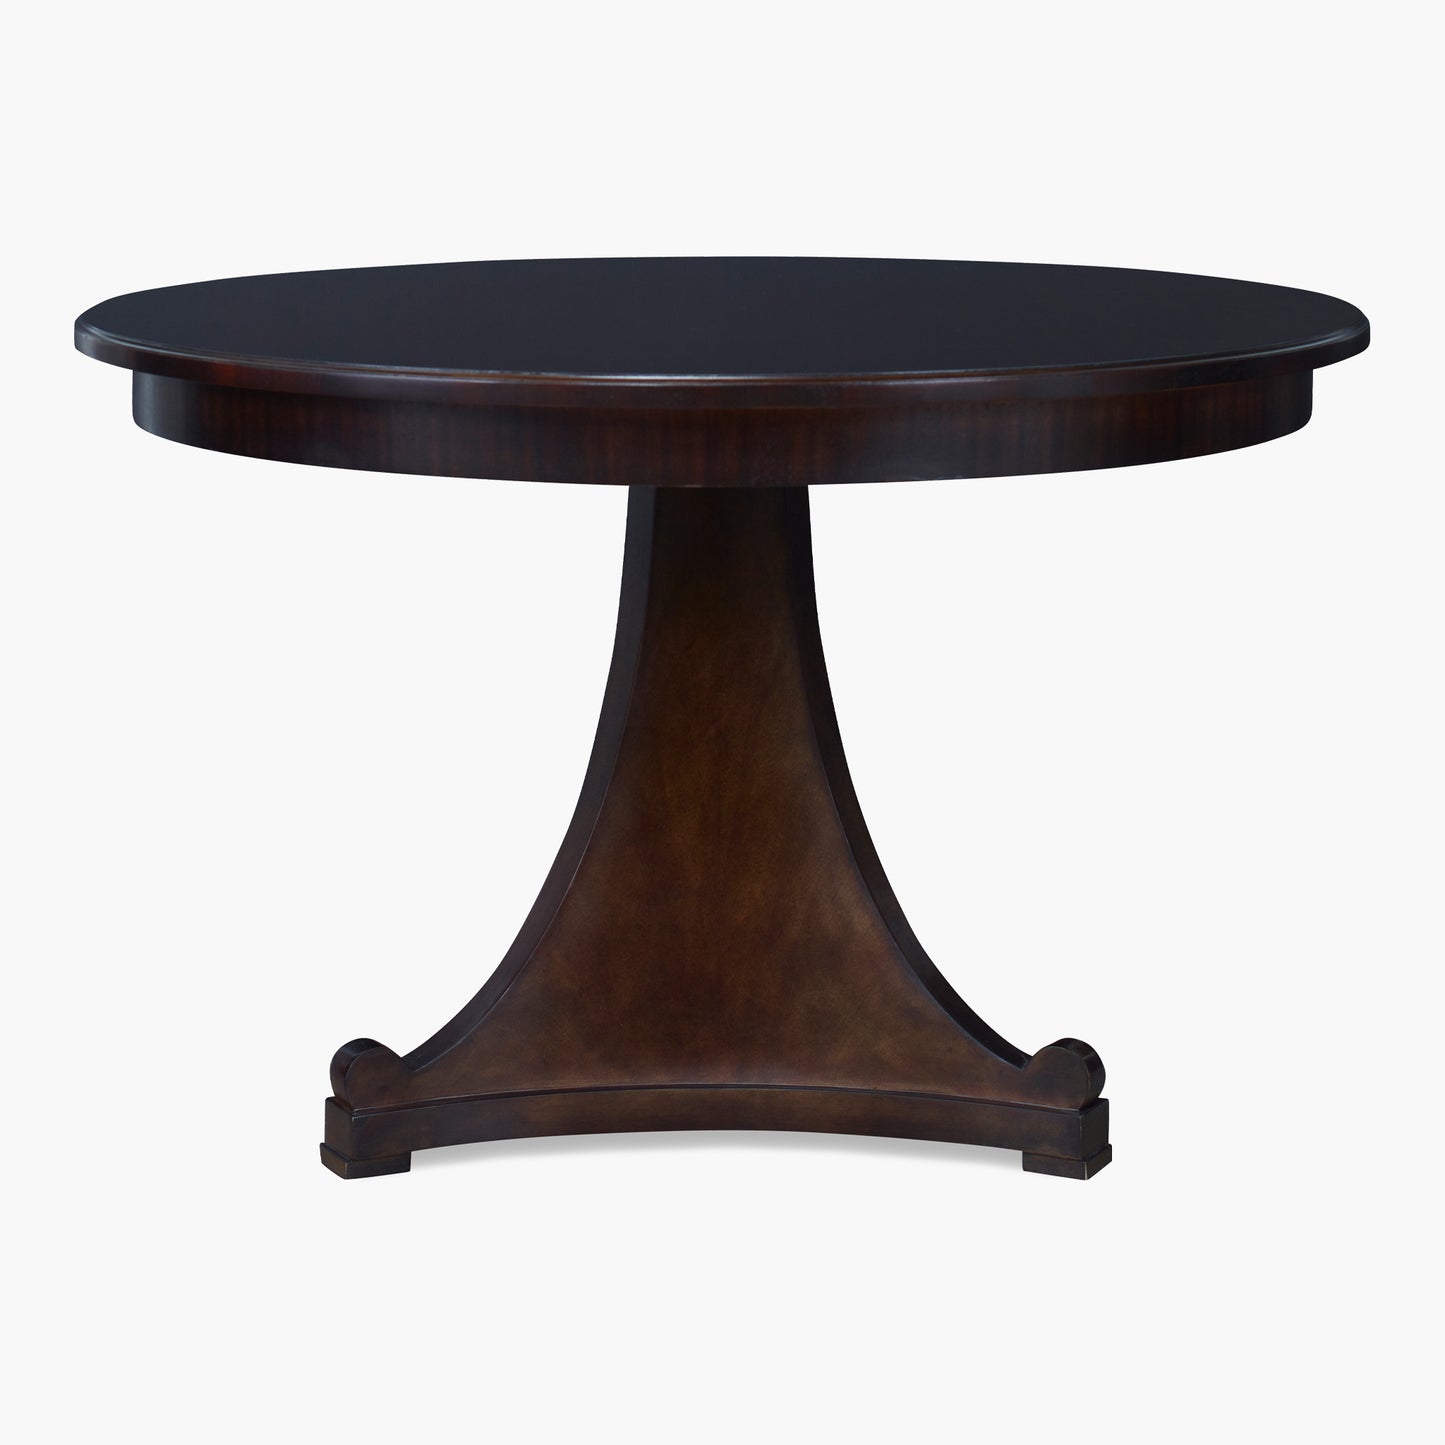 Drawing Tri-Pedestal Round Dining Table